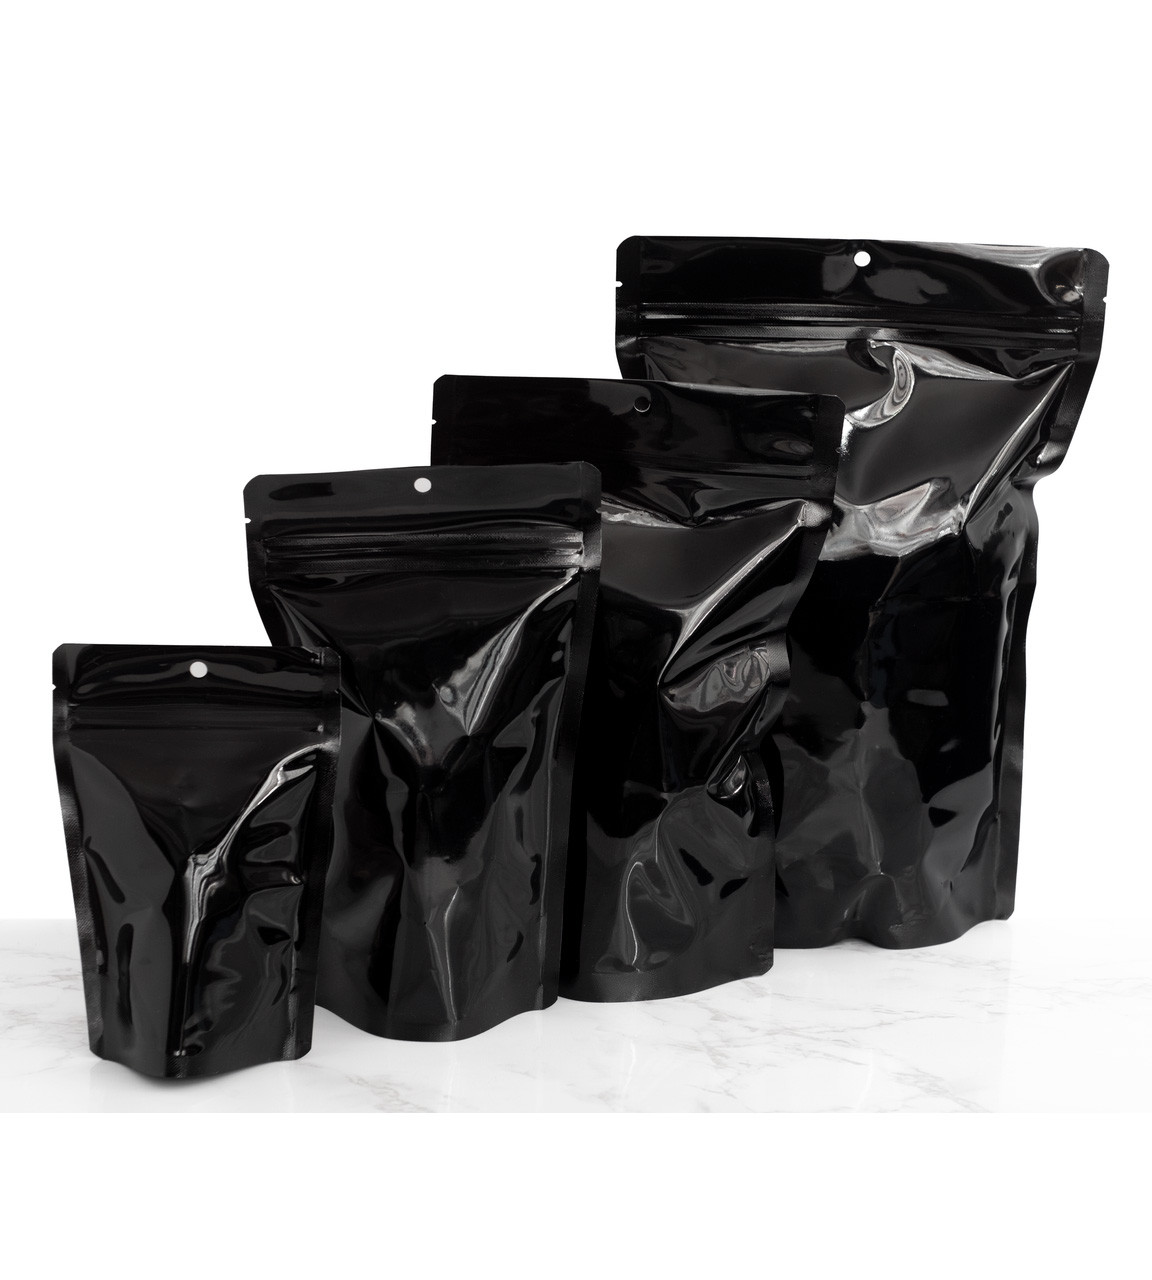 Wholesale Wholesale Metalized bags stand up plastic bag food